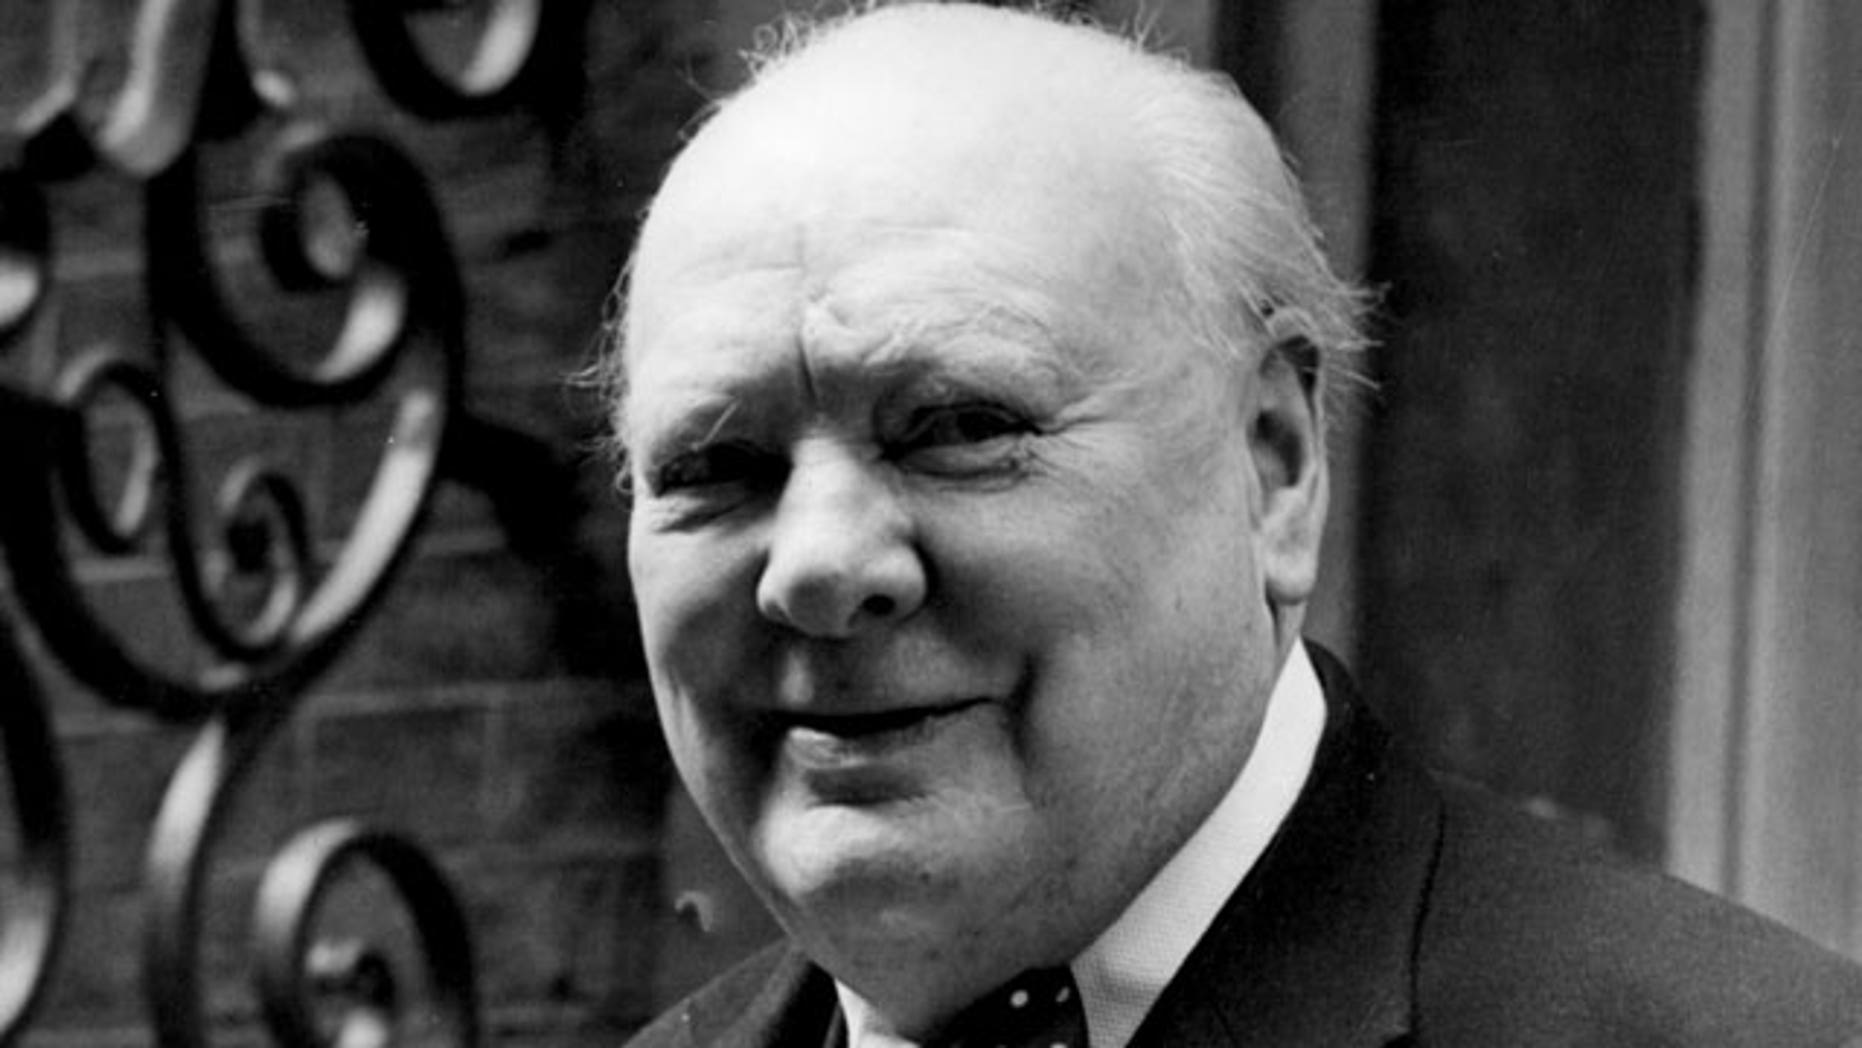 Andrew Roberts: Winston Churchill consciously spent a lifetime shaping his destiny